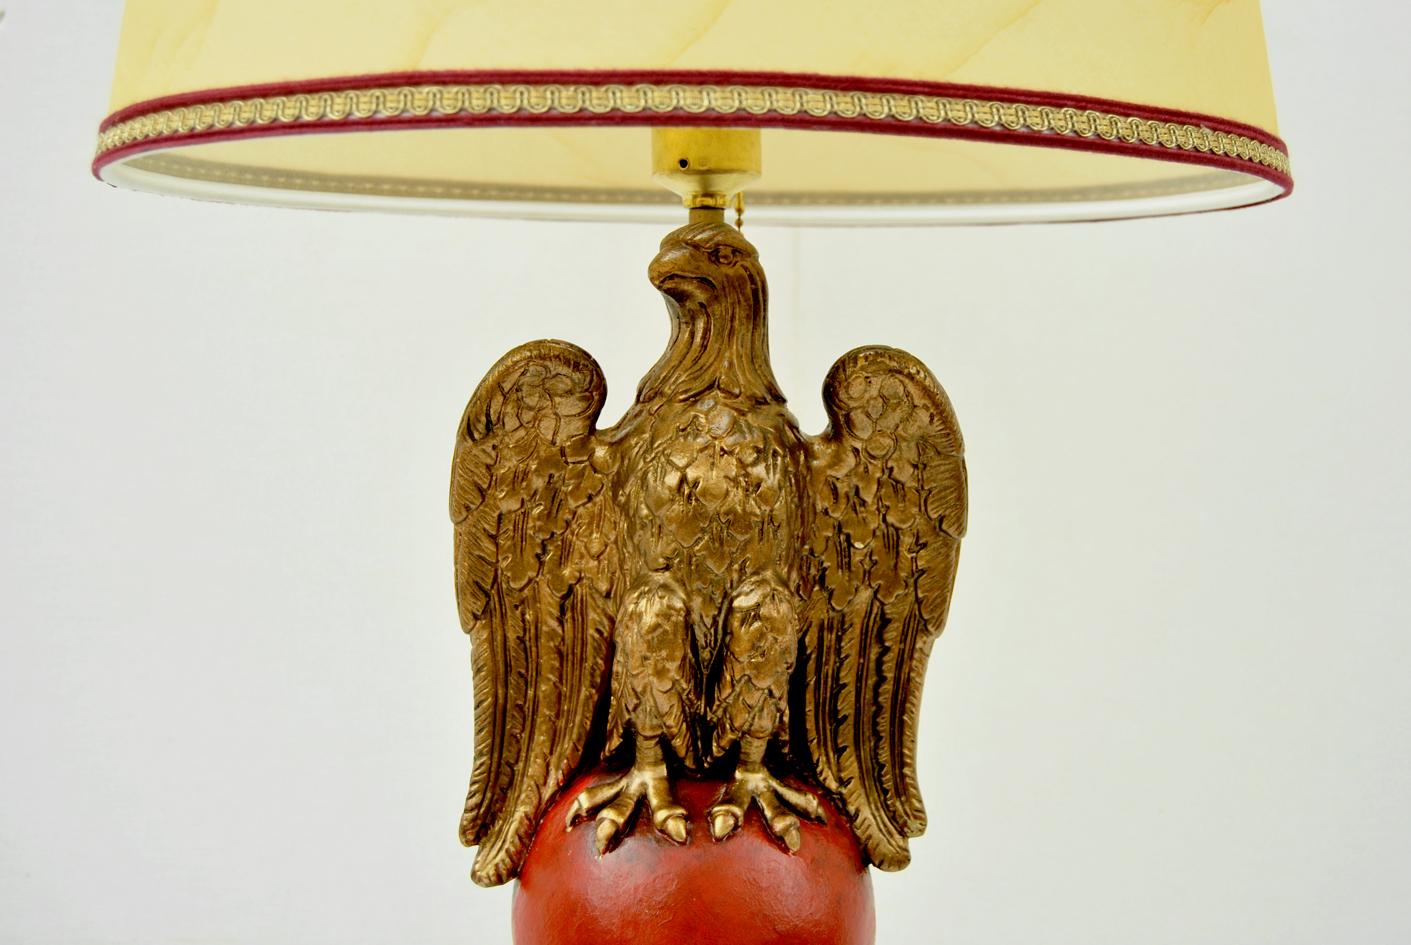 Beautiful German table lamp year 1940. This beautiful lamp comes from Germany and dates back to World War II.
The lacquered wooden column, is topped by the eagle made  in gilded marble powder; the whole rests on a brass base. 
Restored item, is in